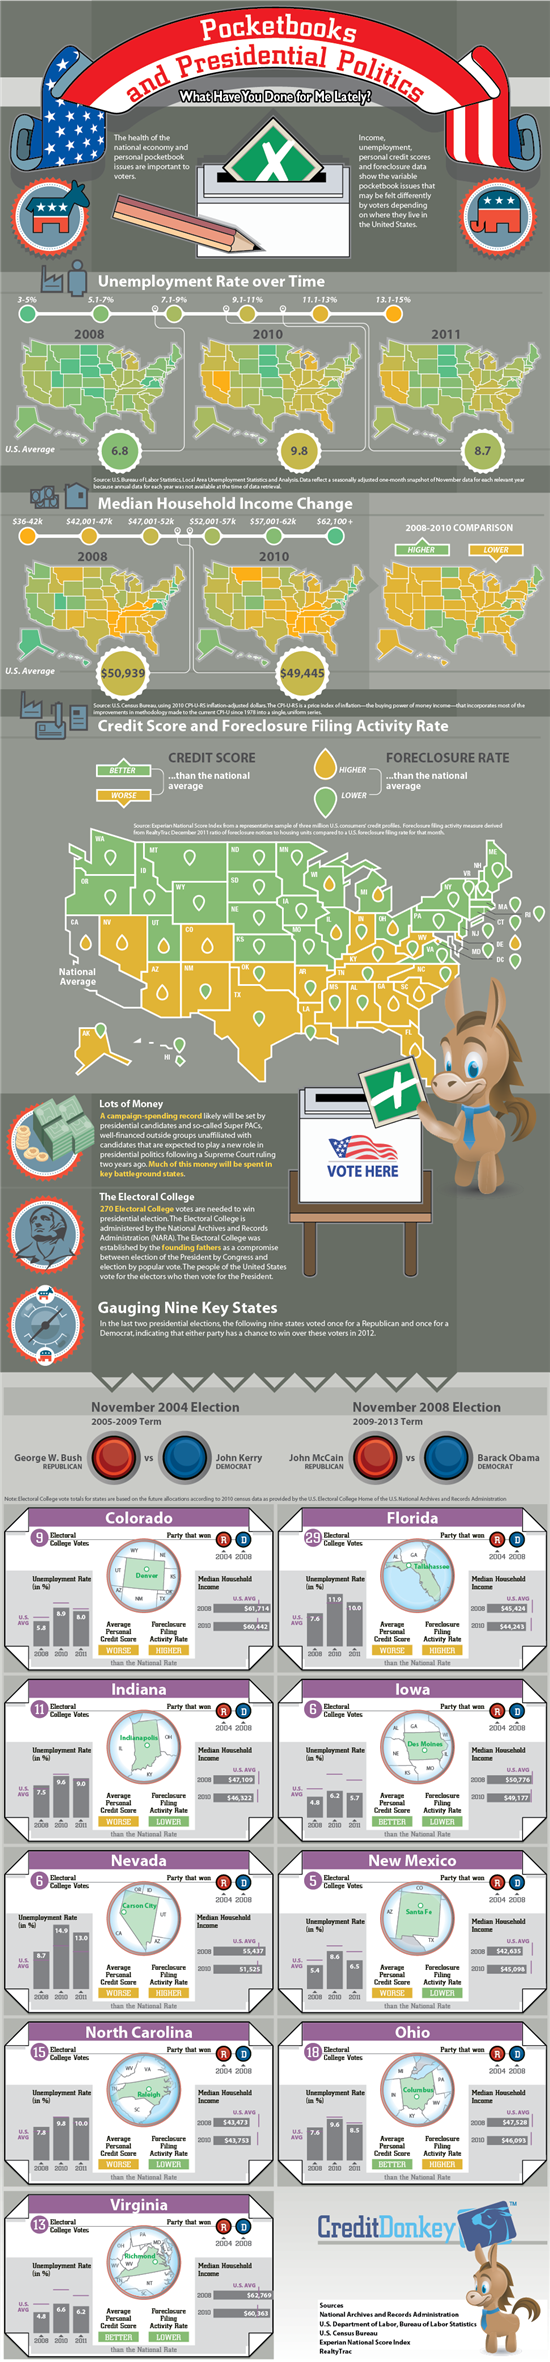 Infographics: Pocketbook Issues and Presidential Politics